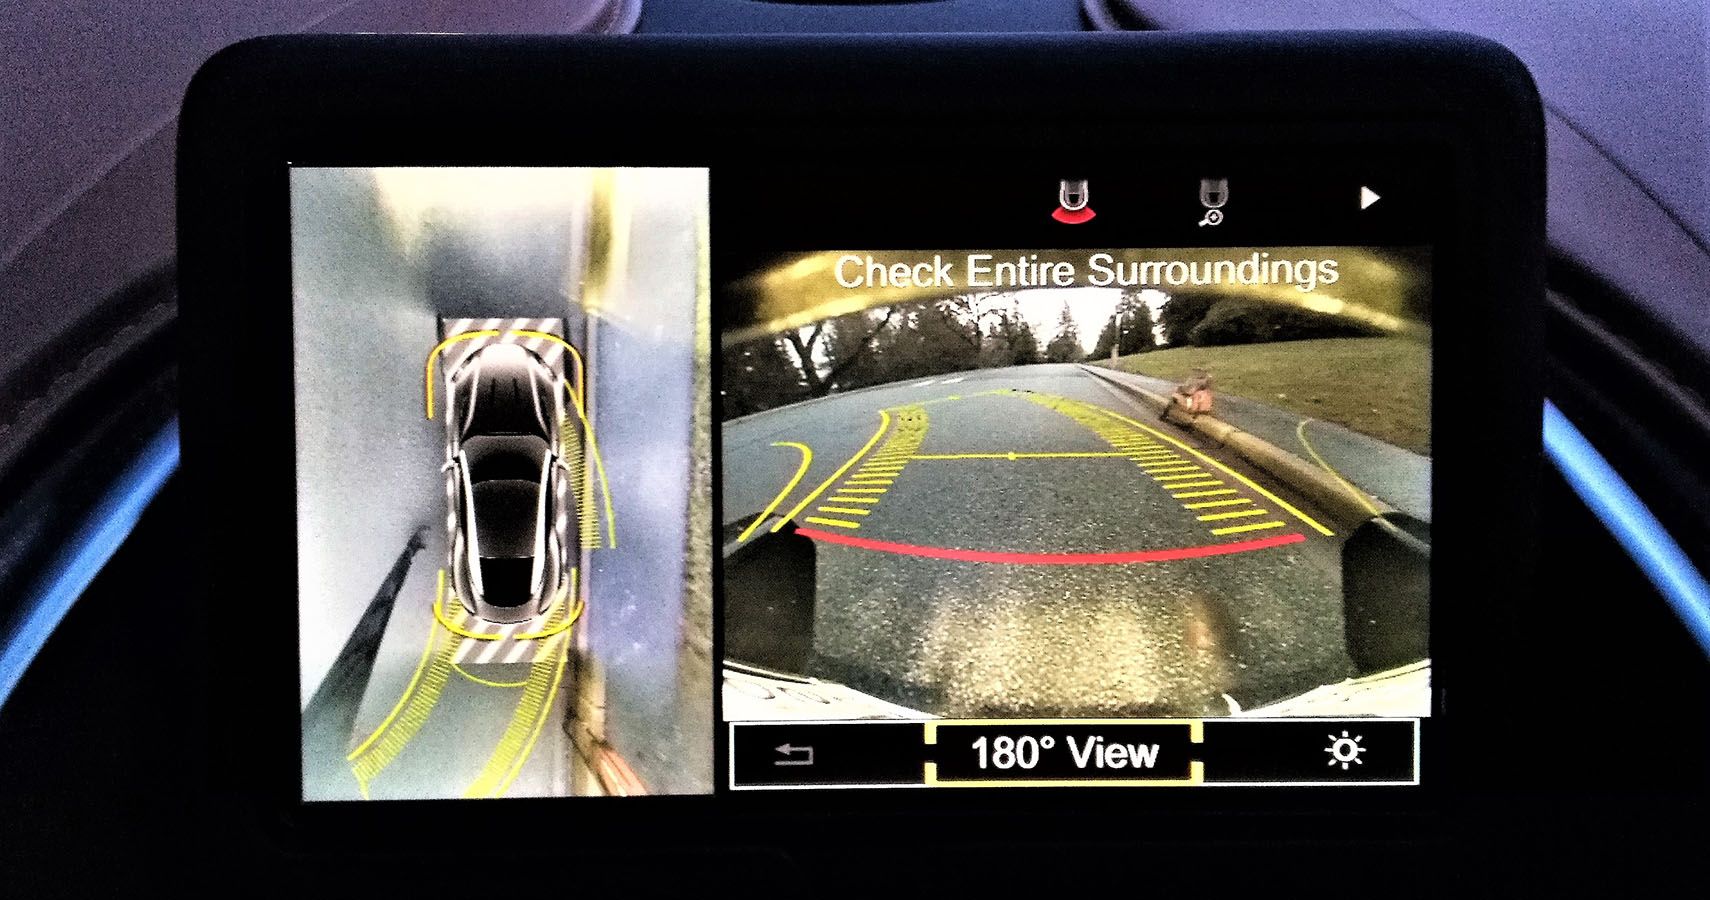 The 8.0-inch infotainment system is a big improvement over the previous design.